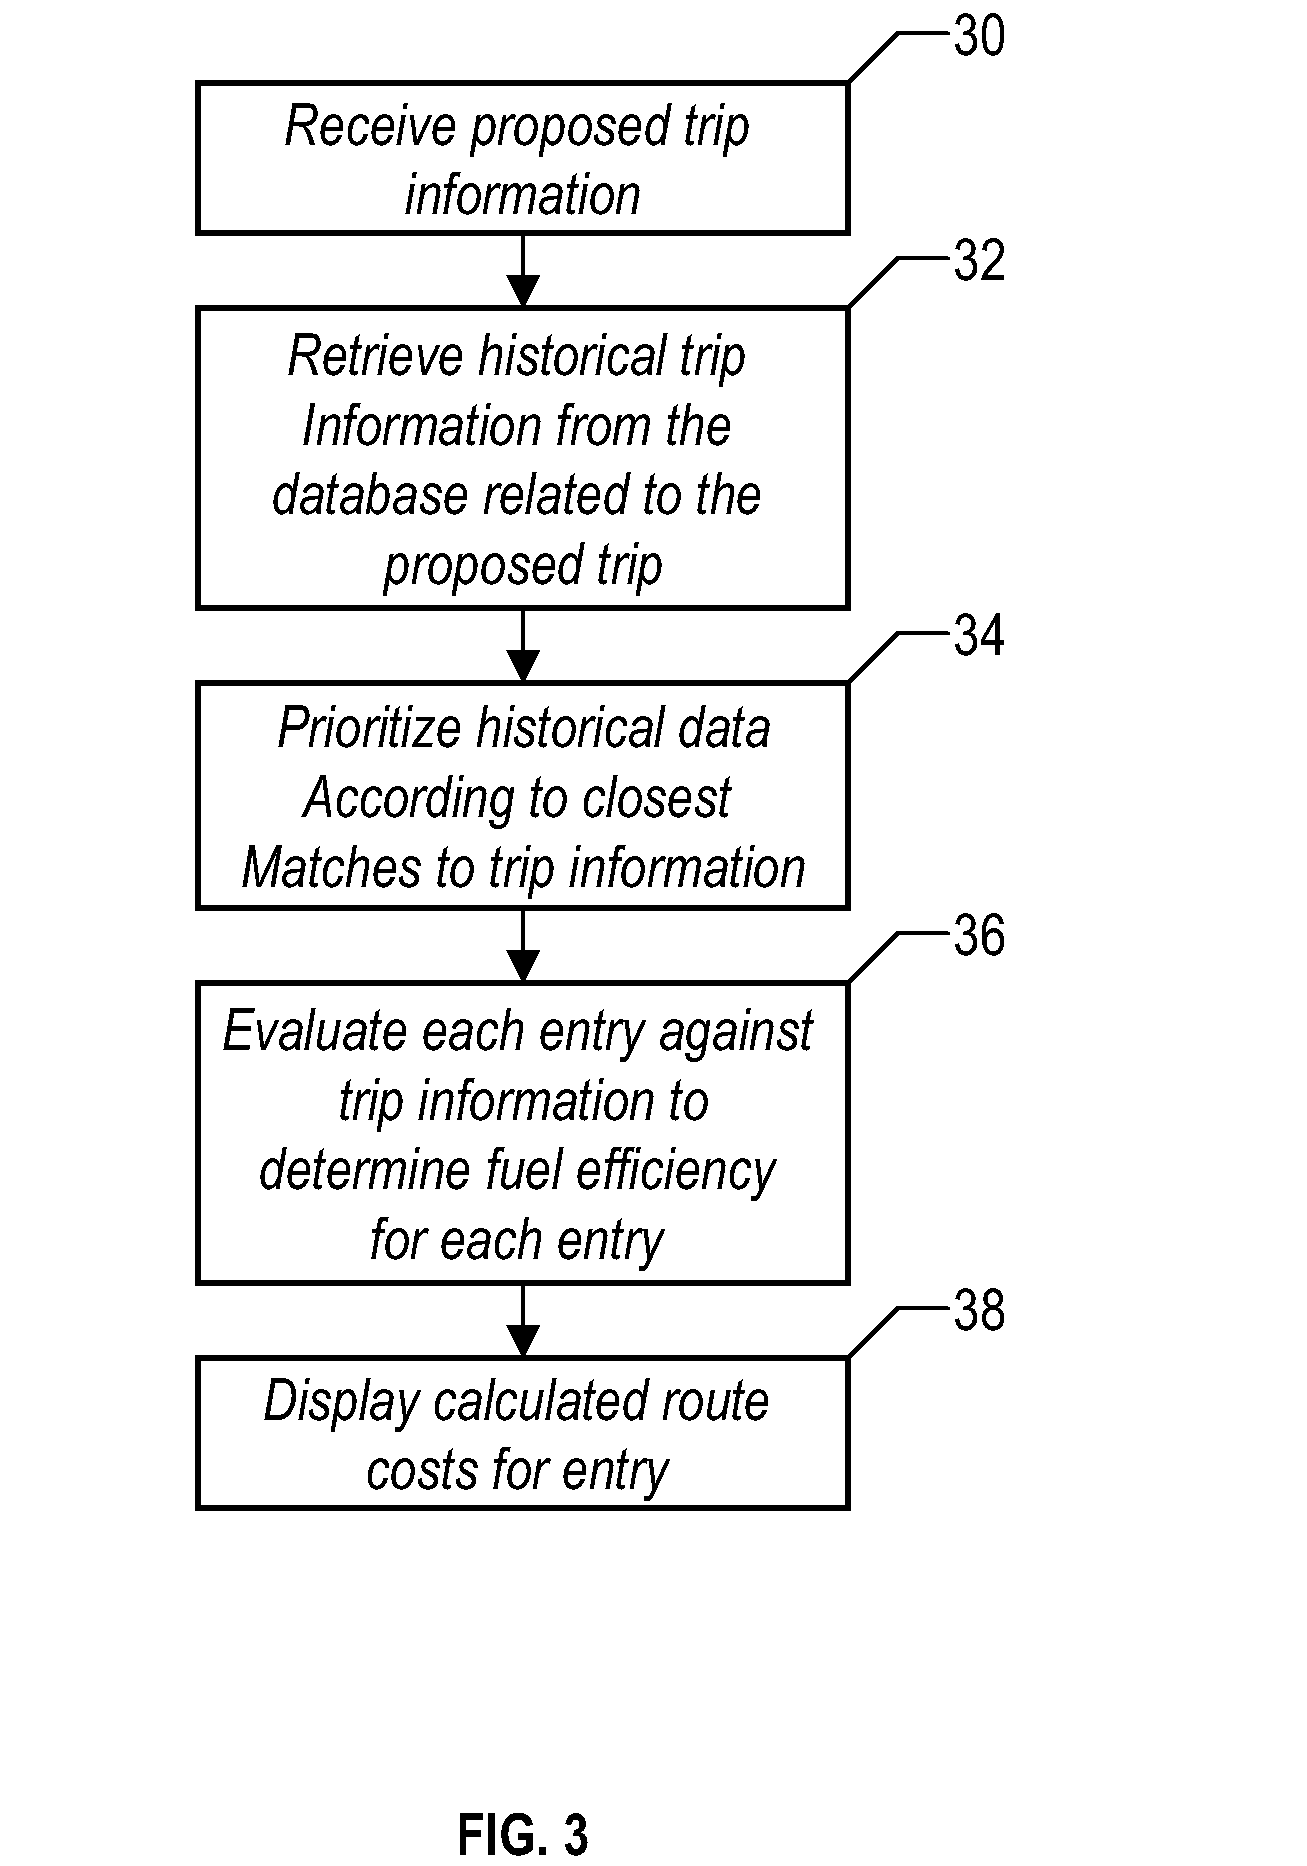 Method and system for calculating least-cost routes based on historical fuel efficiency, street mapping and location based services